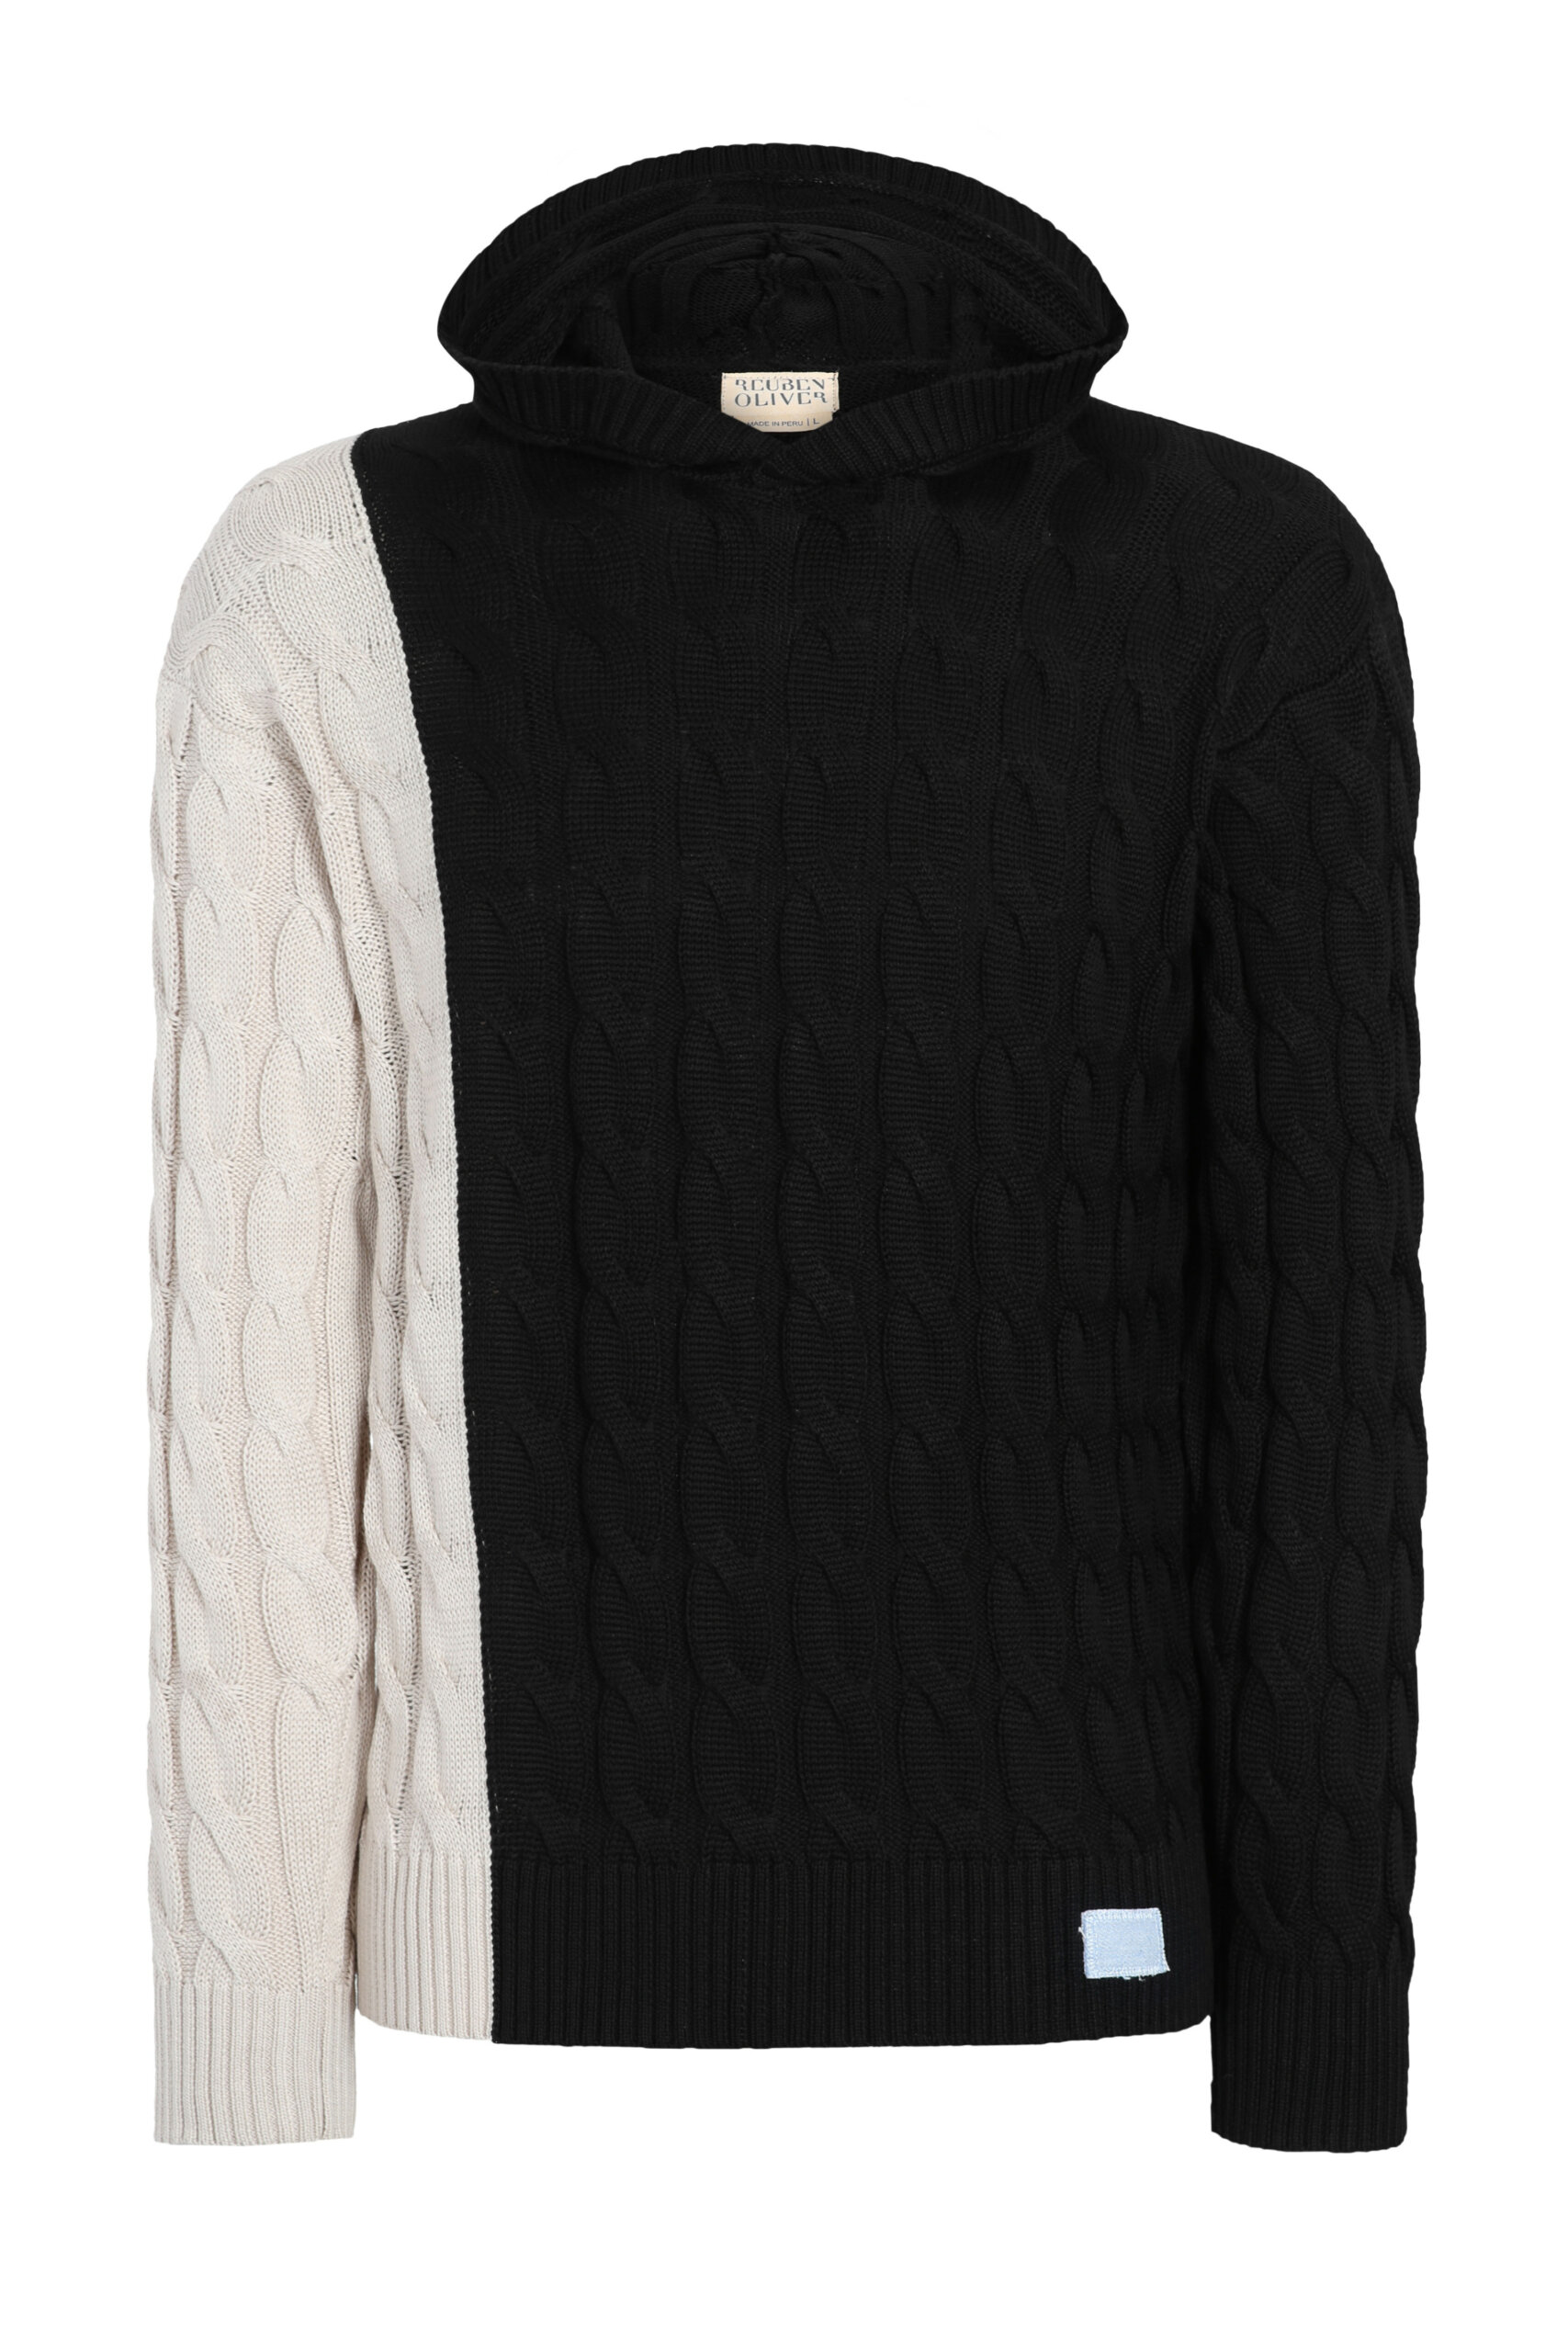 Men's Black / White Two-Toned Cable Knit Hoodie Small Reuben Oliver